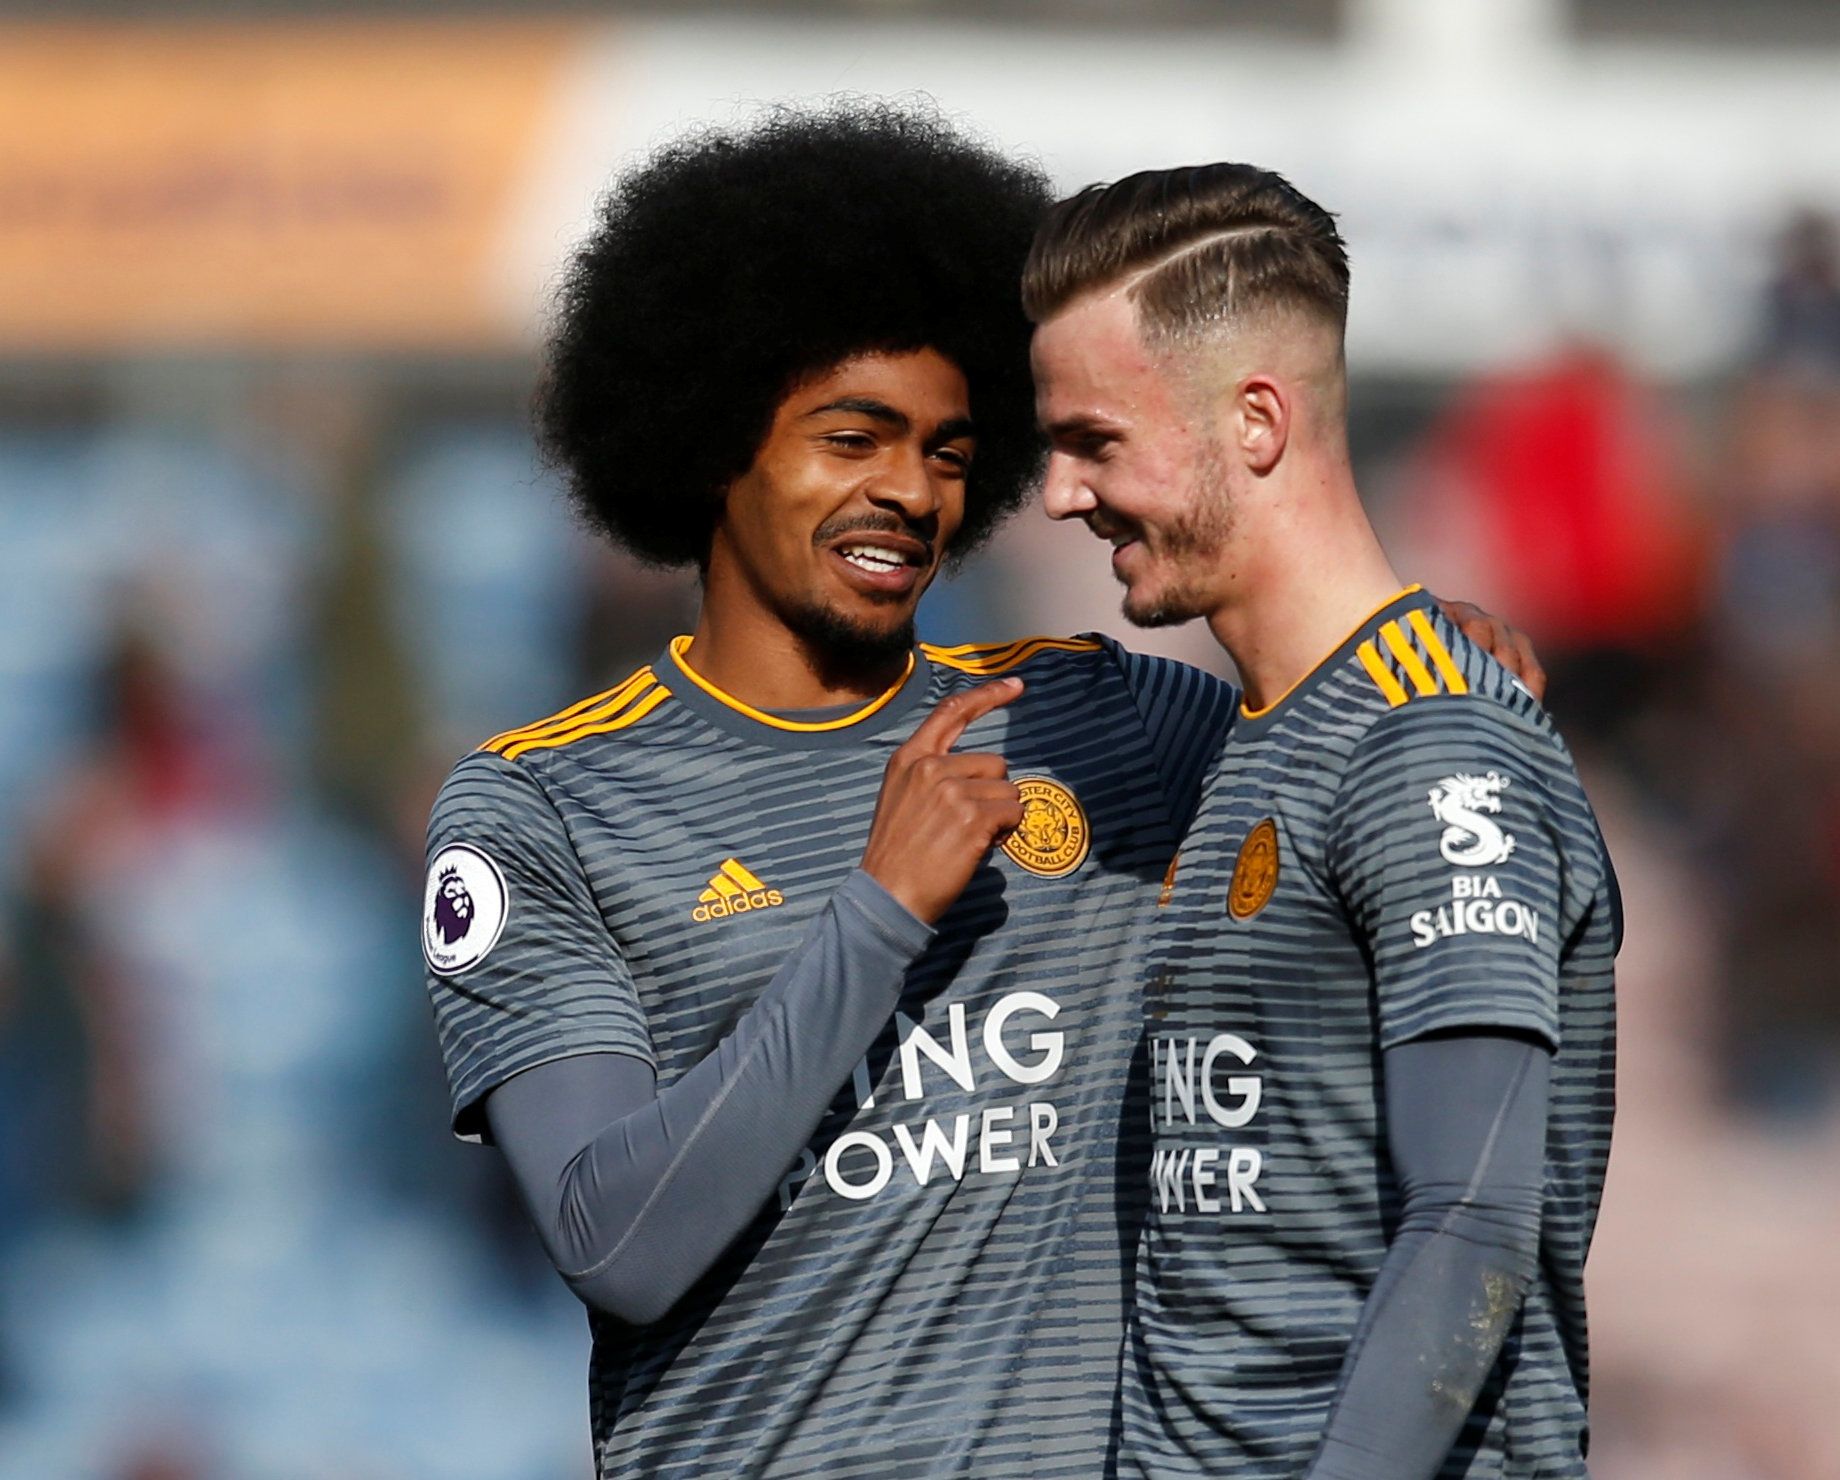 Soccer Football - Premier League - Huddersfield Town v Leicester City - John Smith's Stadium, Huddersfield, Britain - April 6, 2019  Leicester City's Hamza Choudhury and James Maddison celebrate after the match          Action Images via Reuters/Ed Sykes  EDITORIAL USE ONLY. No use with unauthorized audio, video, data, fixture lists, club/league logos or 